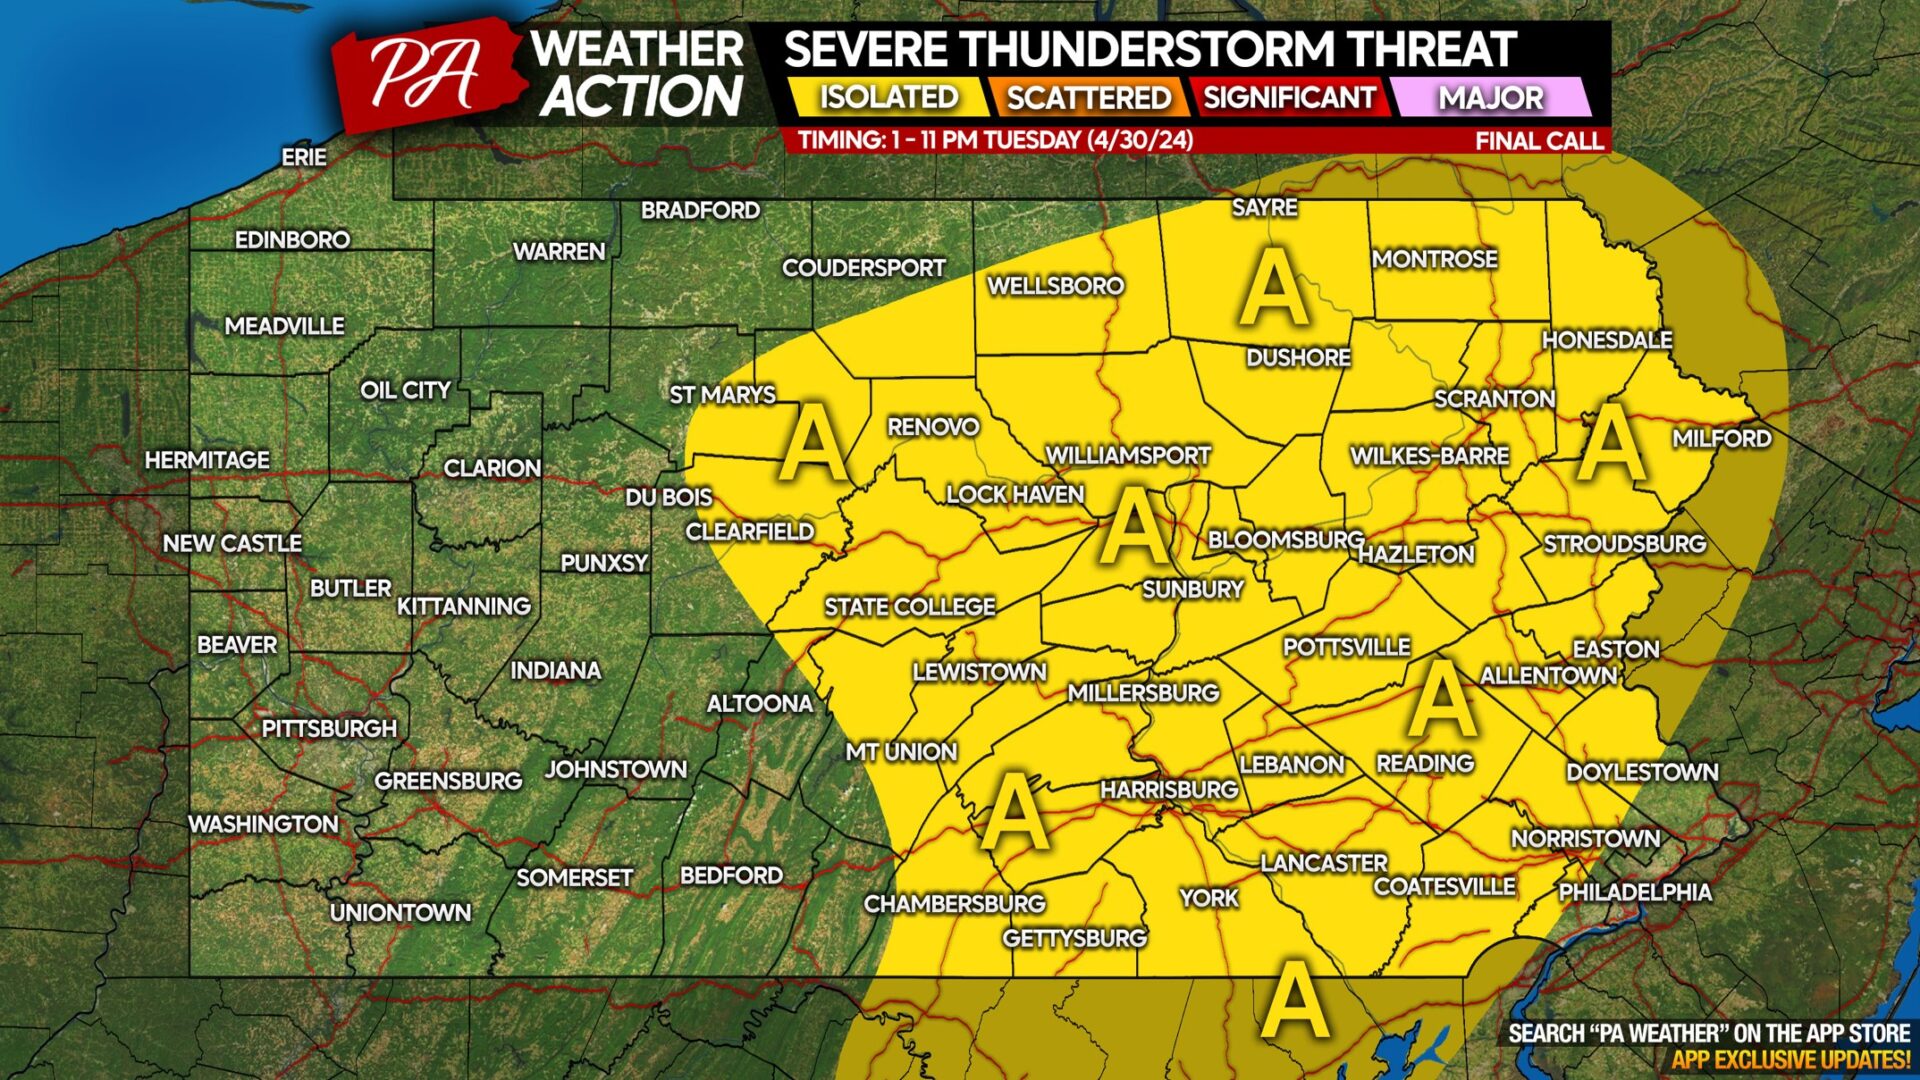 Thunderstorms Possible Tuesday In Parts of Pennsylvania; Threat of Hail, Gusty Winds & Lightning